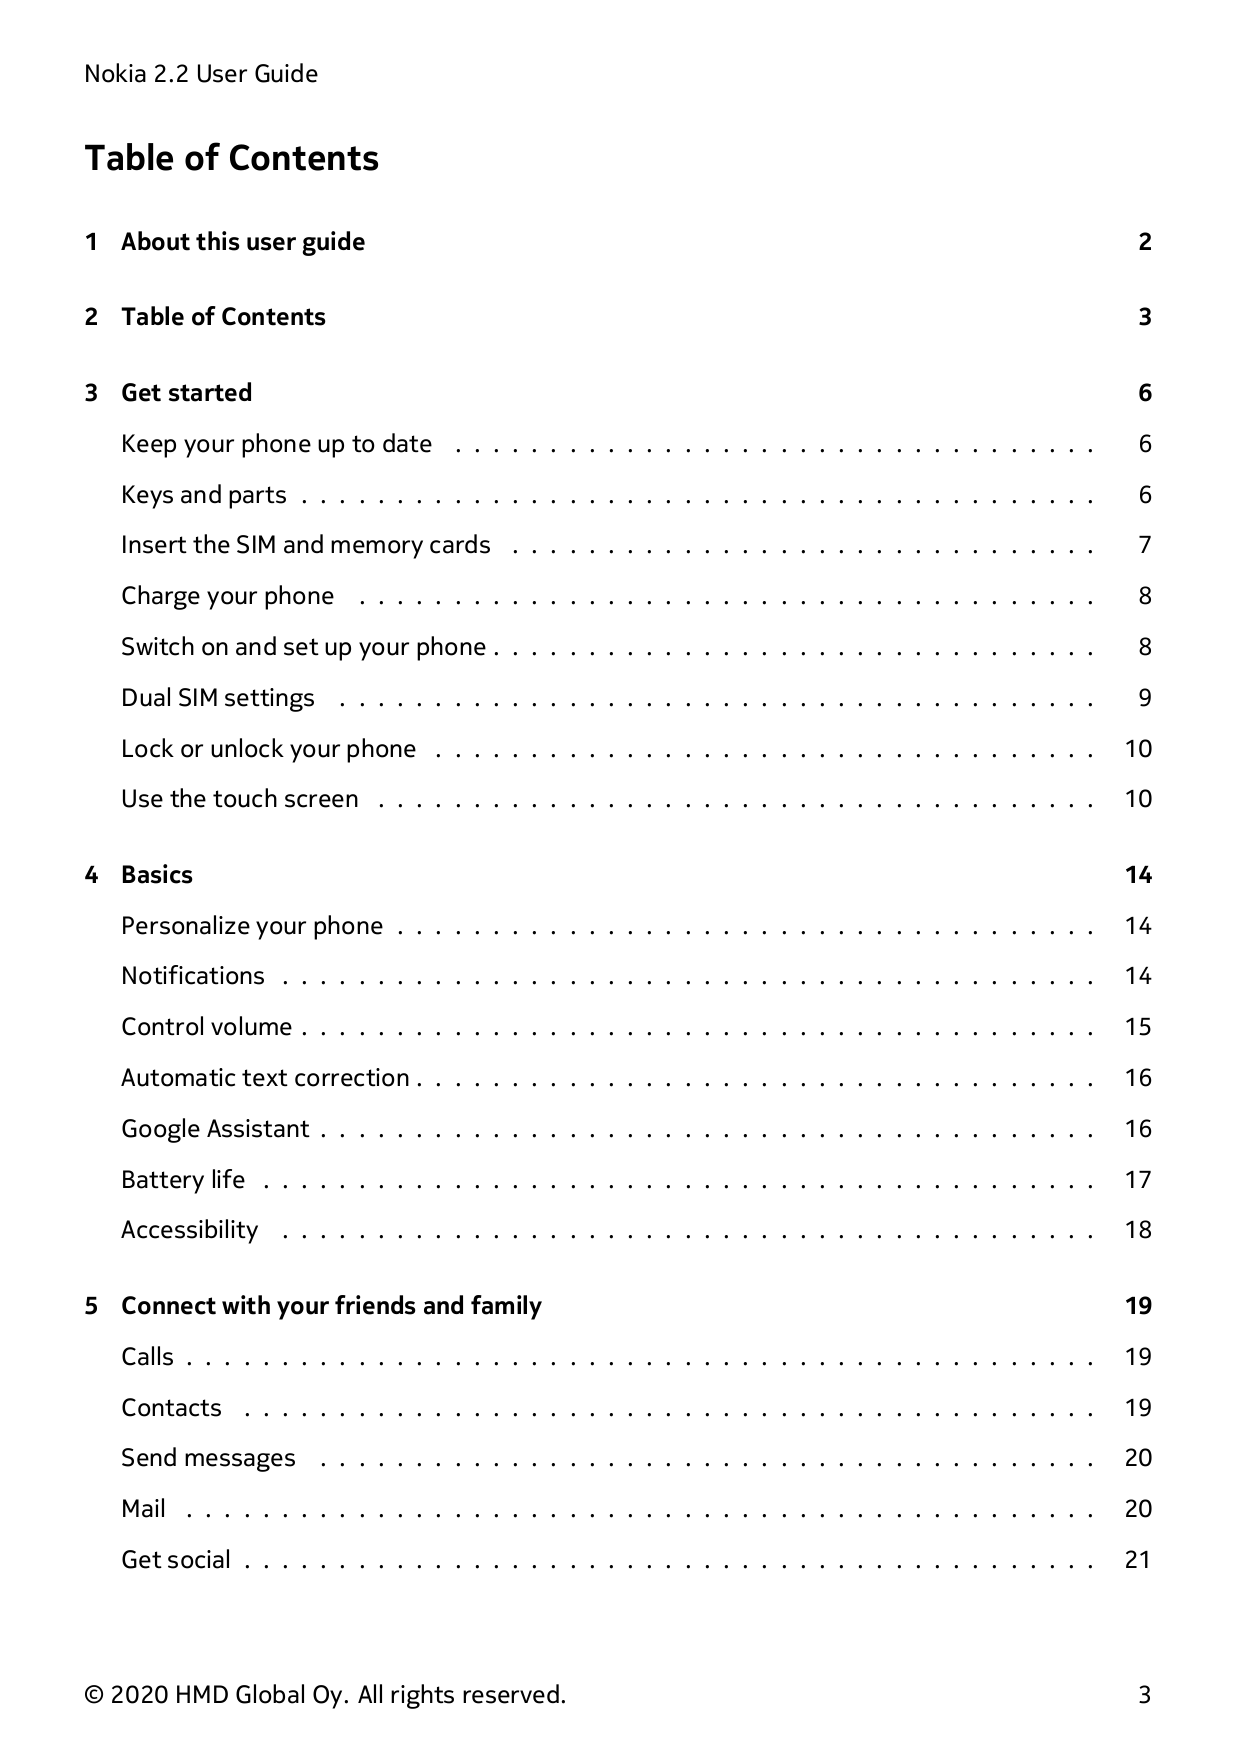 Nokia 2.2 User GuideTable of Contents1 About this user guide22 Table of Contents33 Get started6Keep your phone up to date . . . 